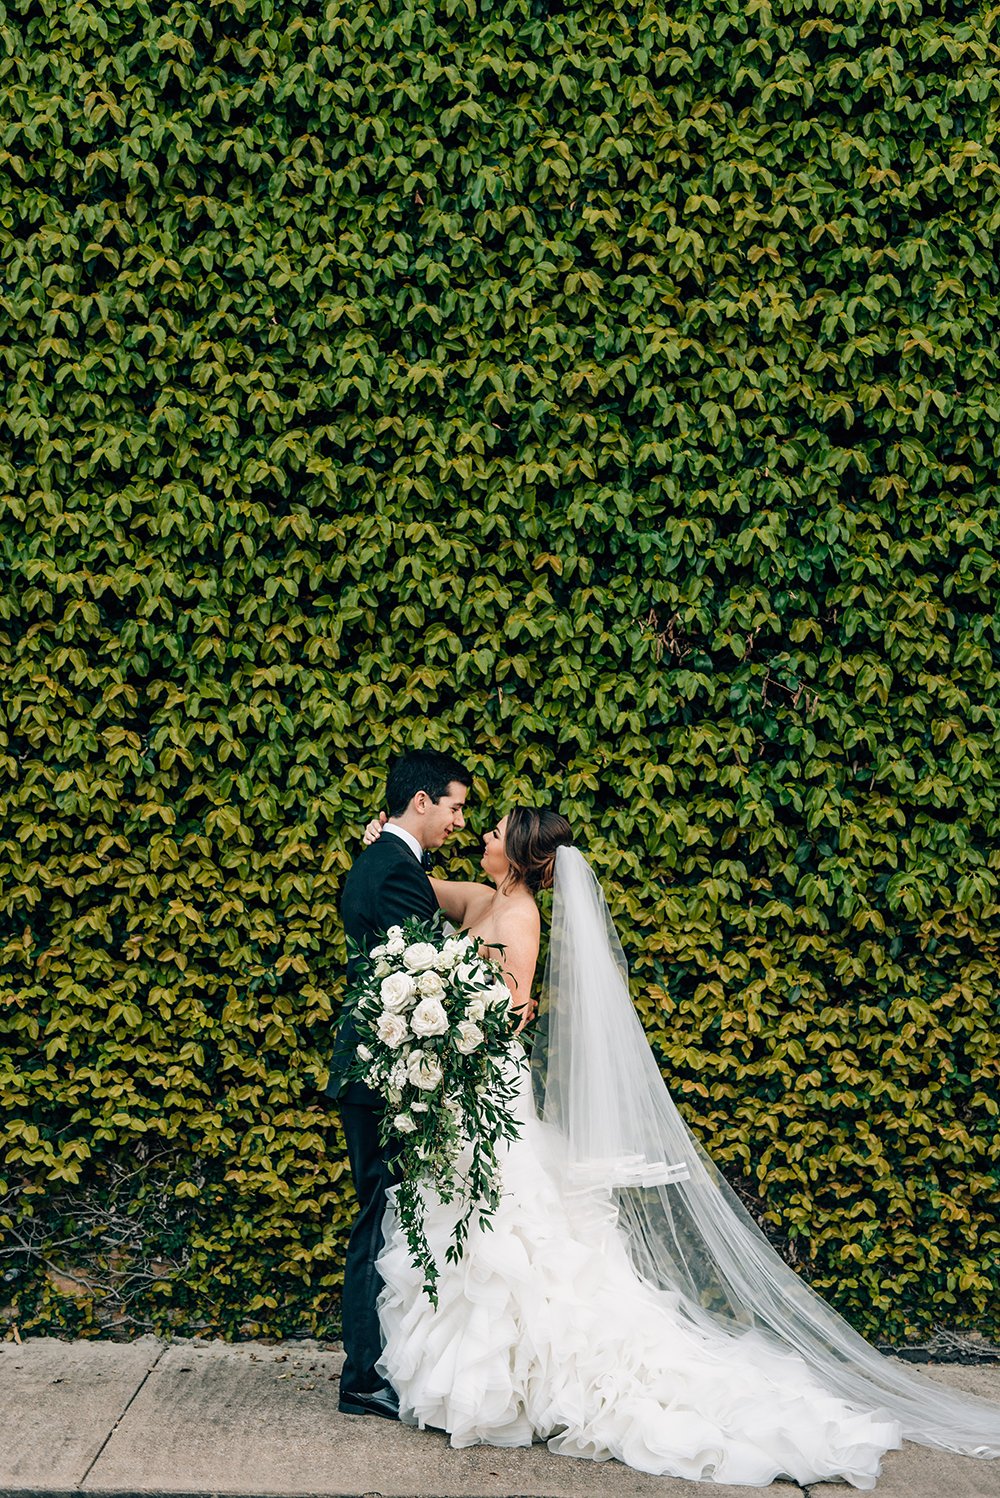 outdoor ceremony venue, houston, the gallery, ivy wall, gorgeous, wedding photos, green